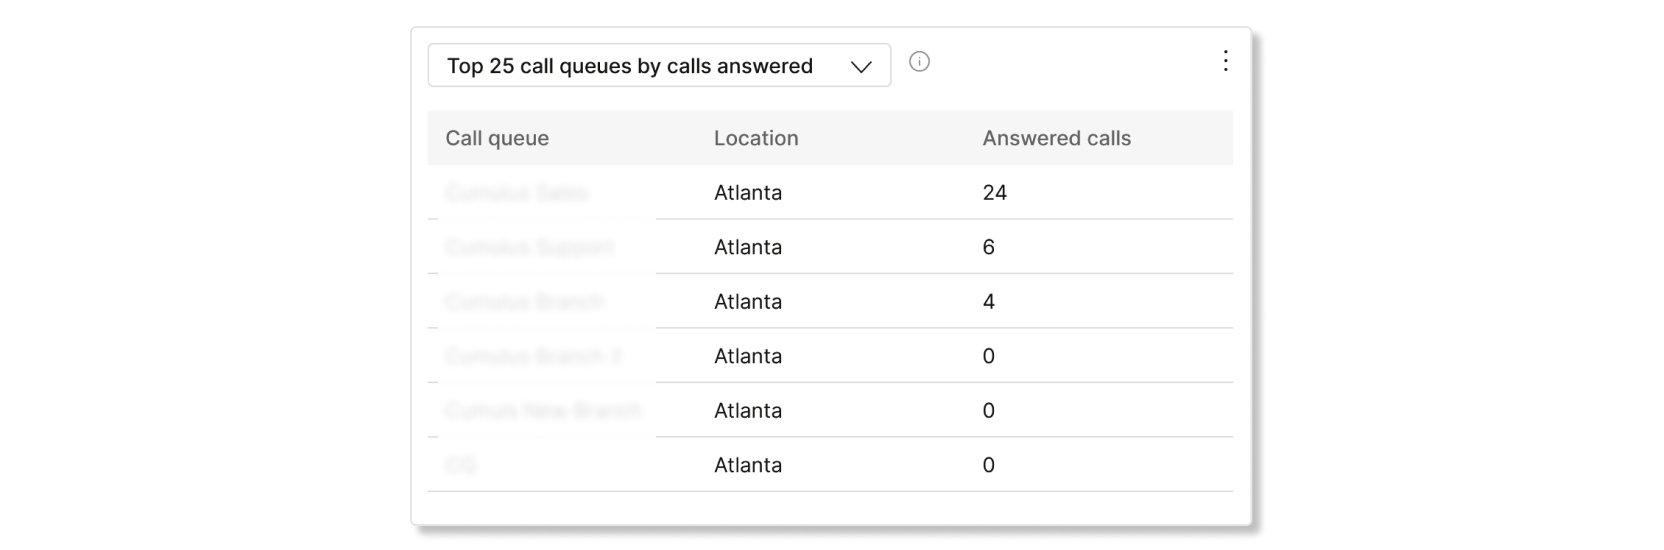 Top 25 call queues by % of calls chart in call queue stats analytics